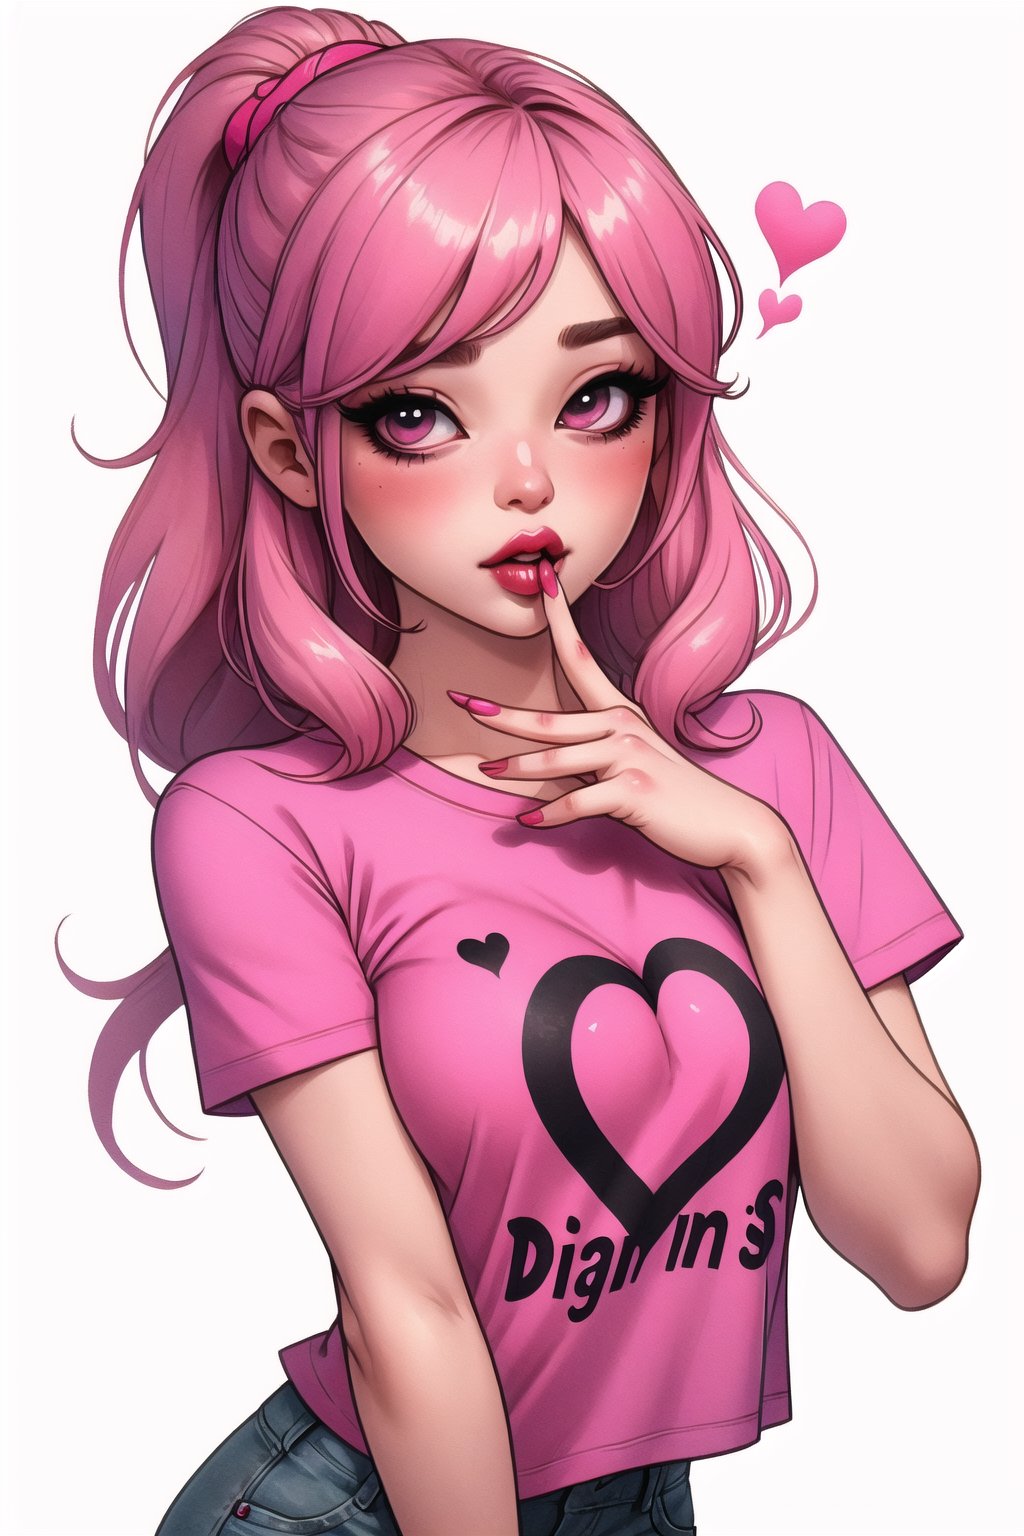 t shirt design deadly sin lust depicted as a sexy woman blowing a heart shaped kiss  in the colour pink t shirt design,CuteSt1